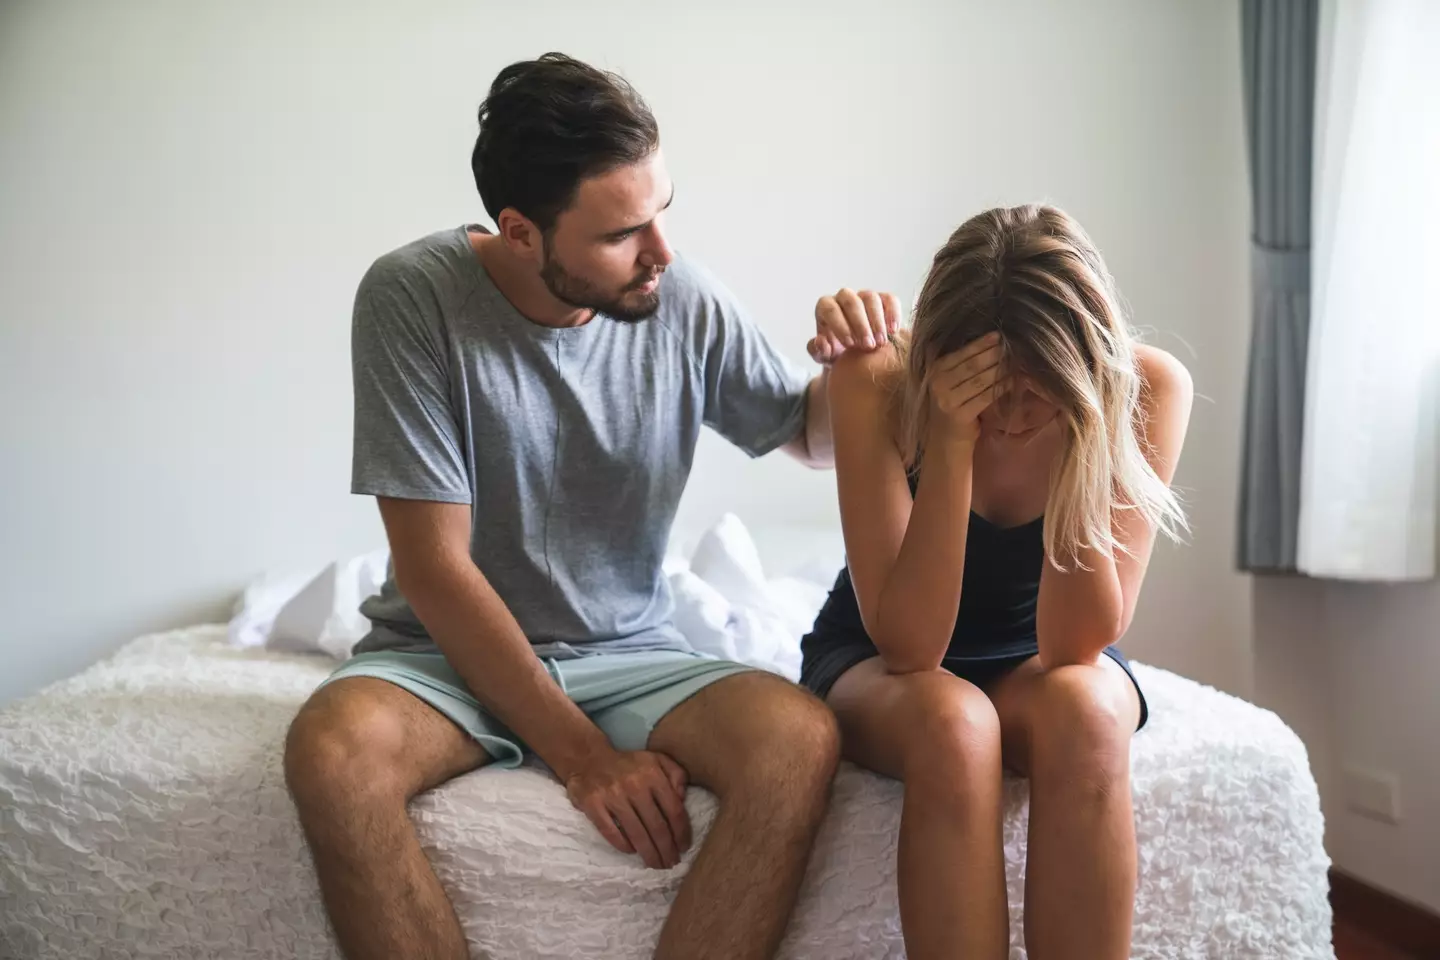 A sex and relationship has revealed the major warning sign your relationship is on the rocks (Witthaya Prasongsin / Getty Images)